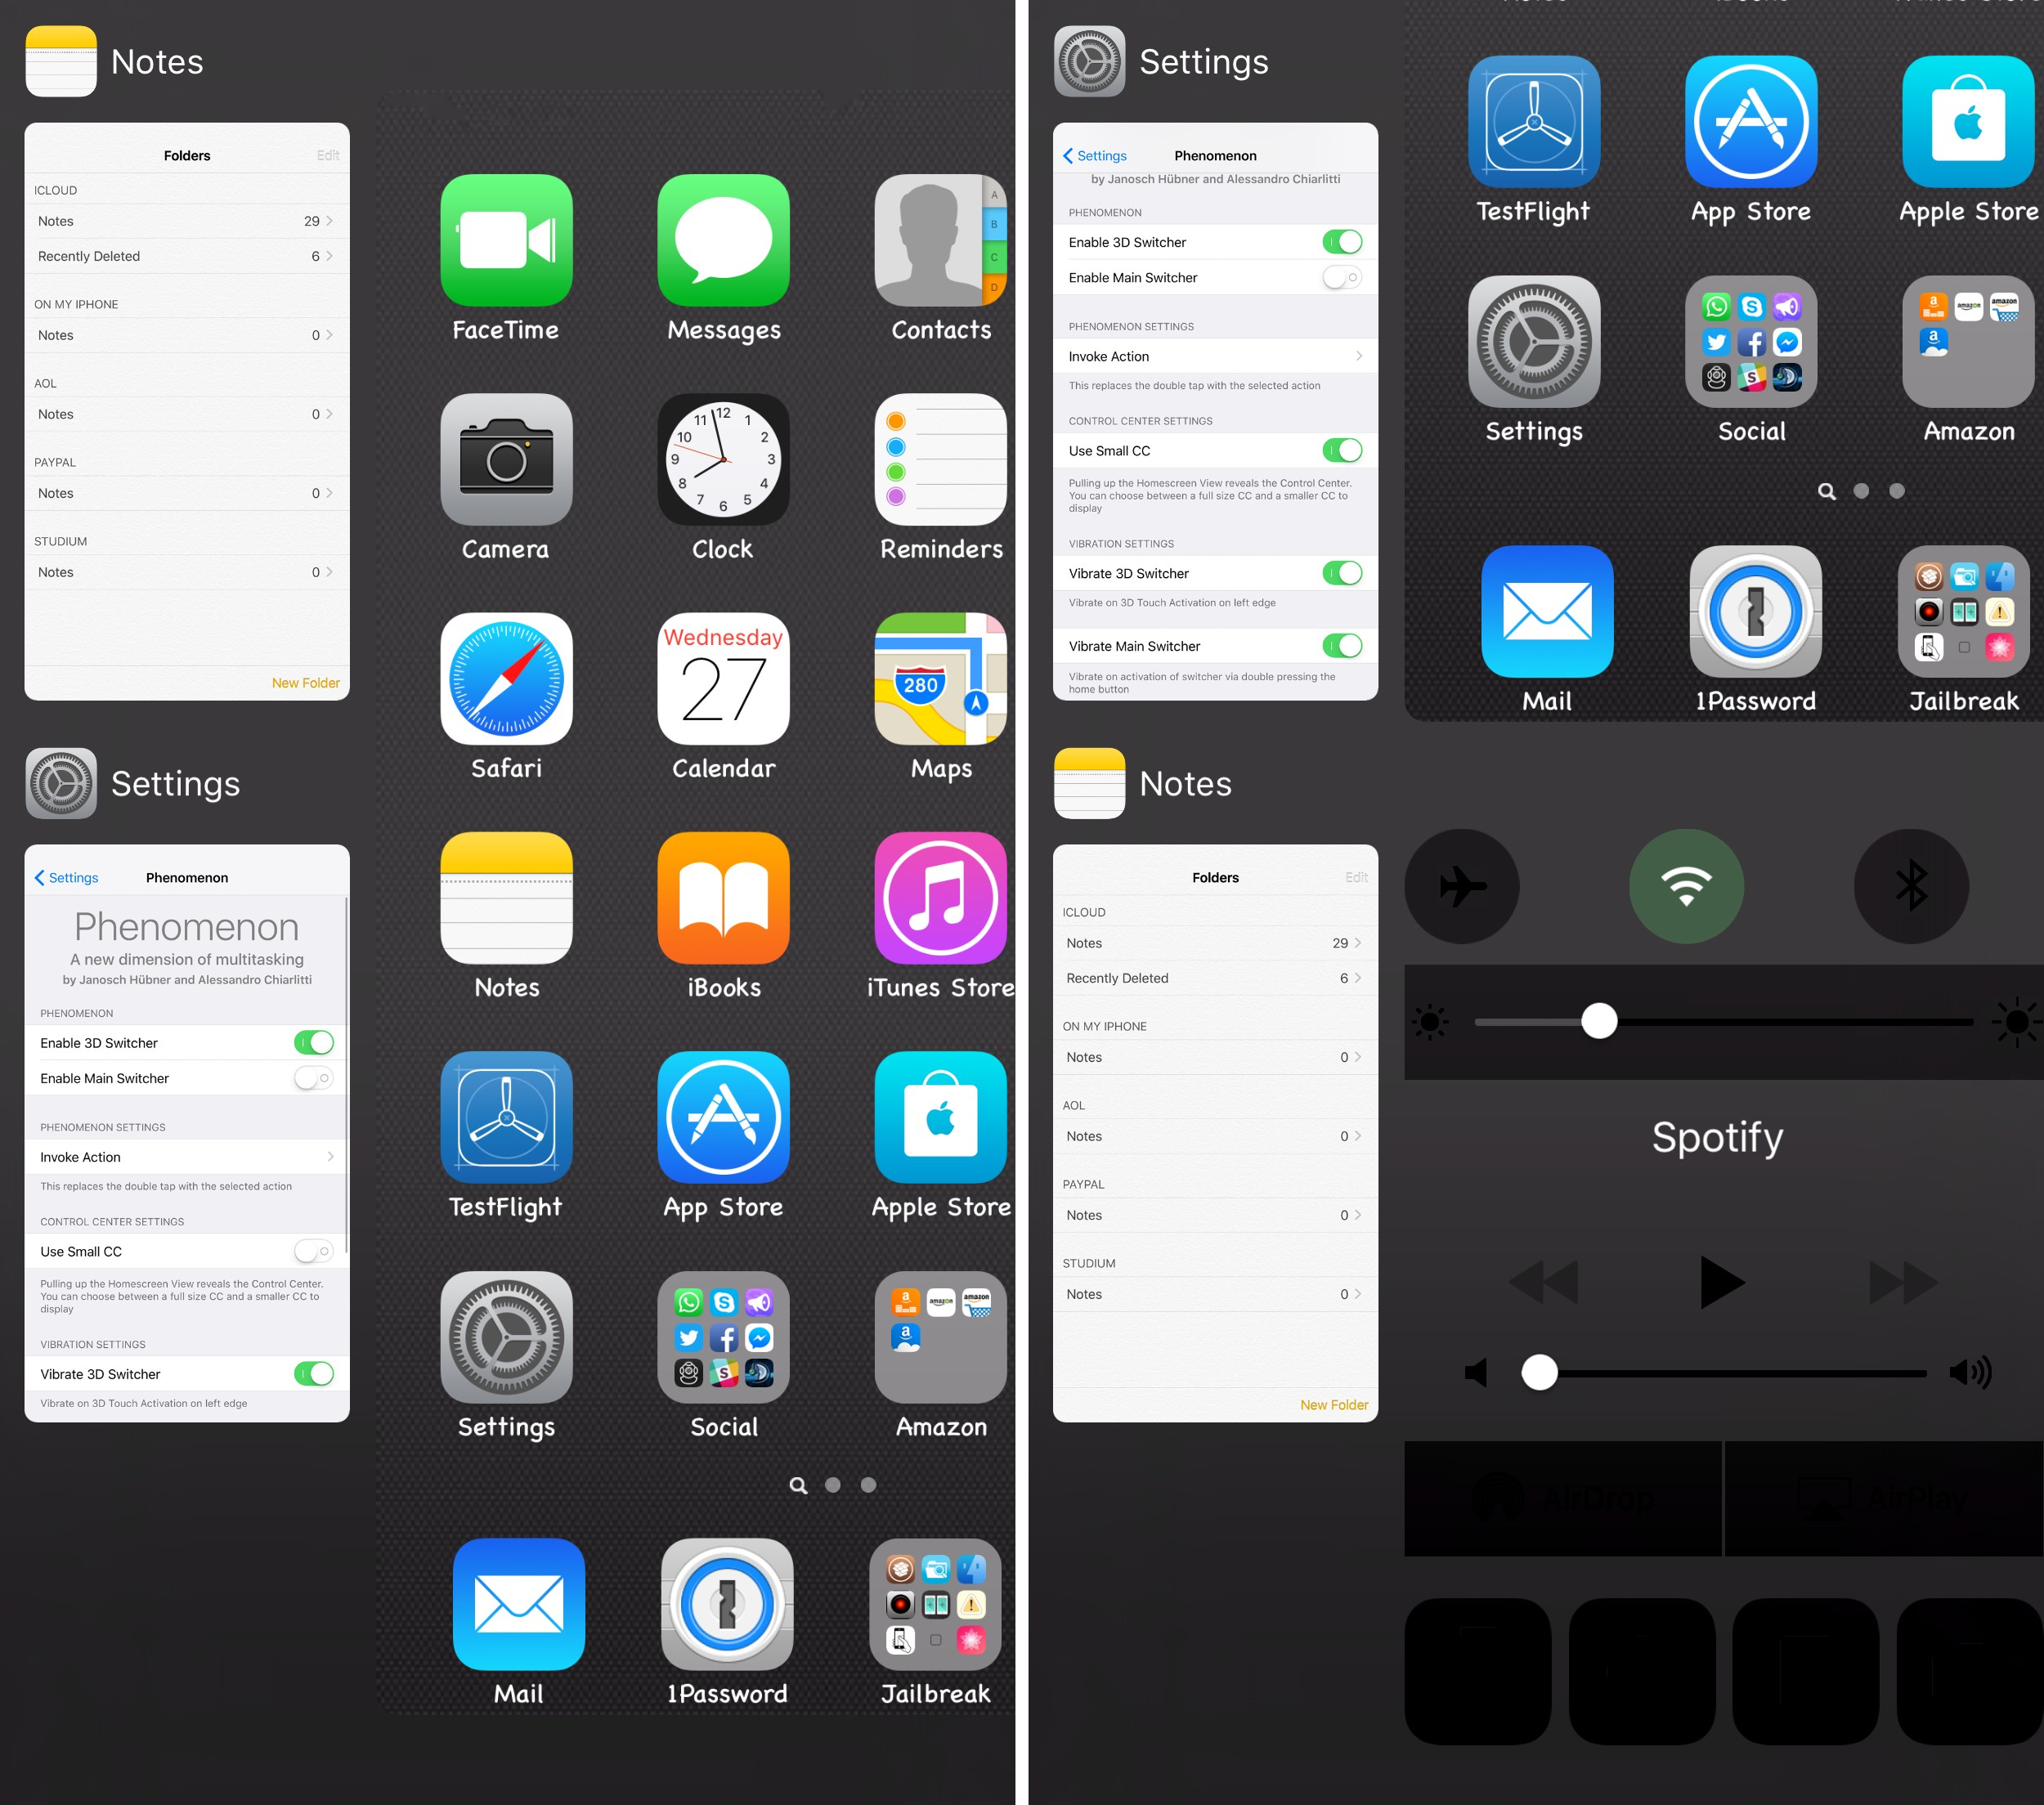 Phenomenon a new app switcher and control center for iOS 9